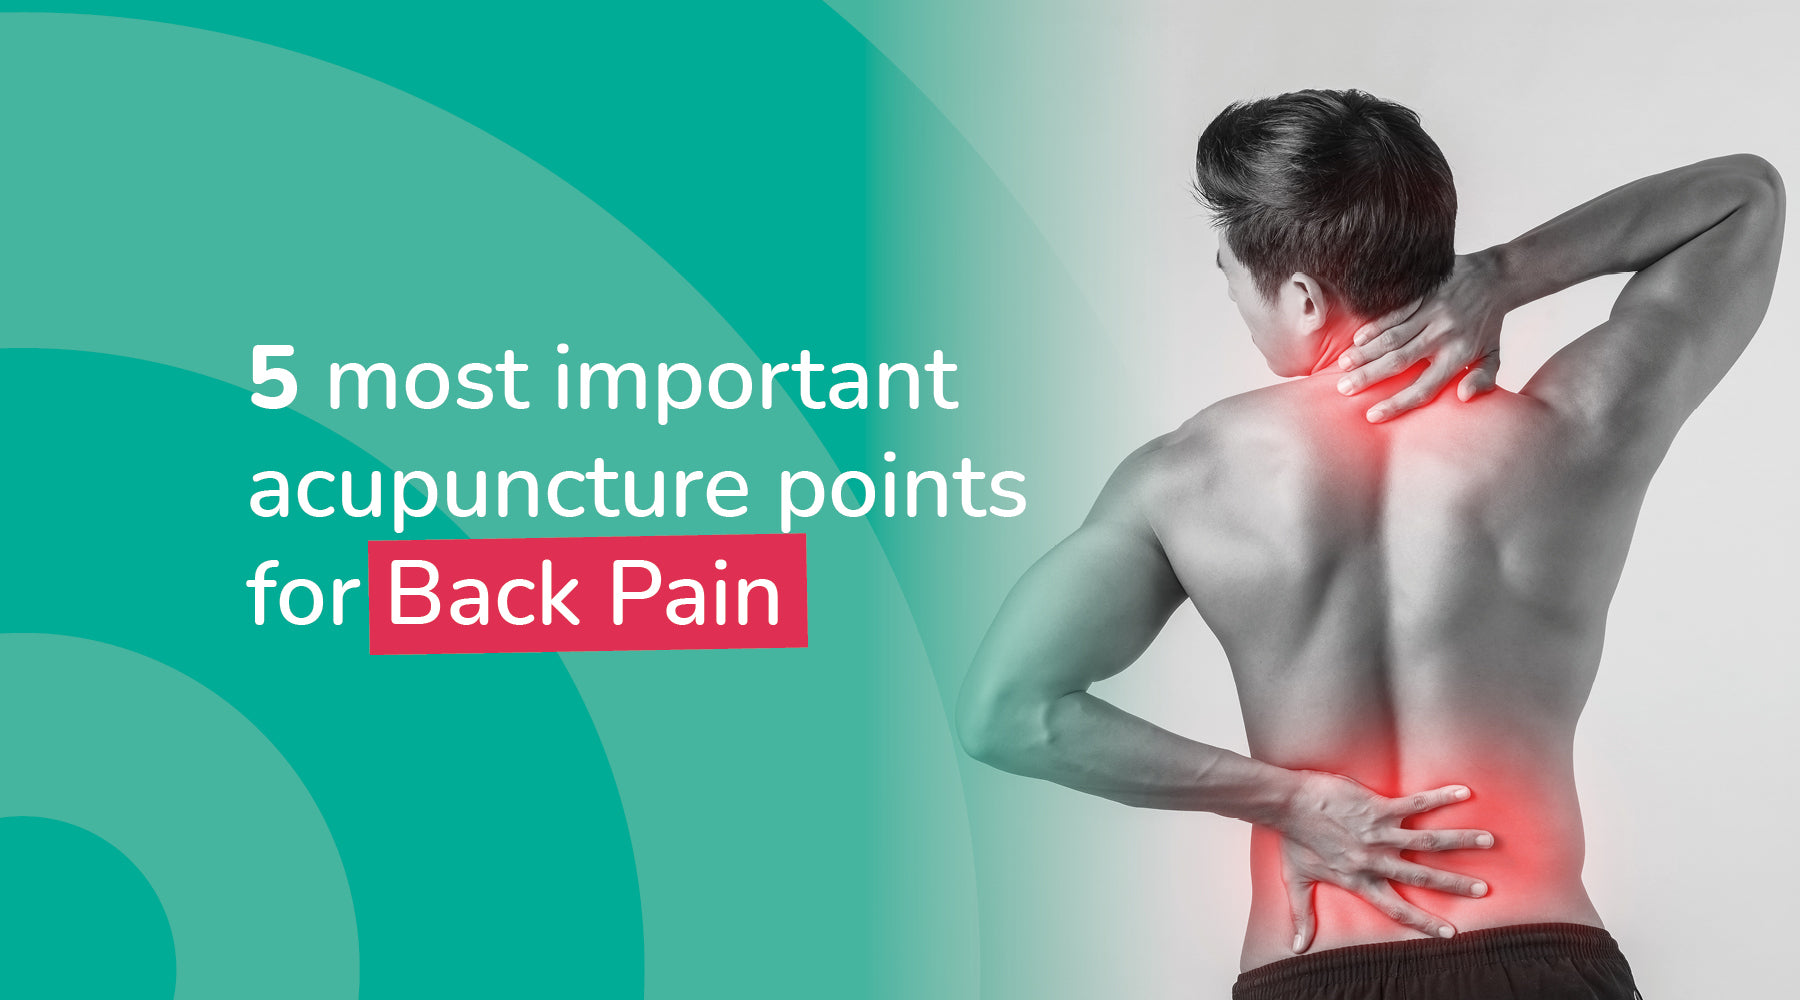 5 Most Important acupuncture Points for Back Pain